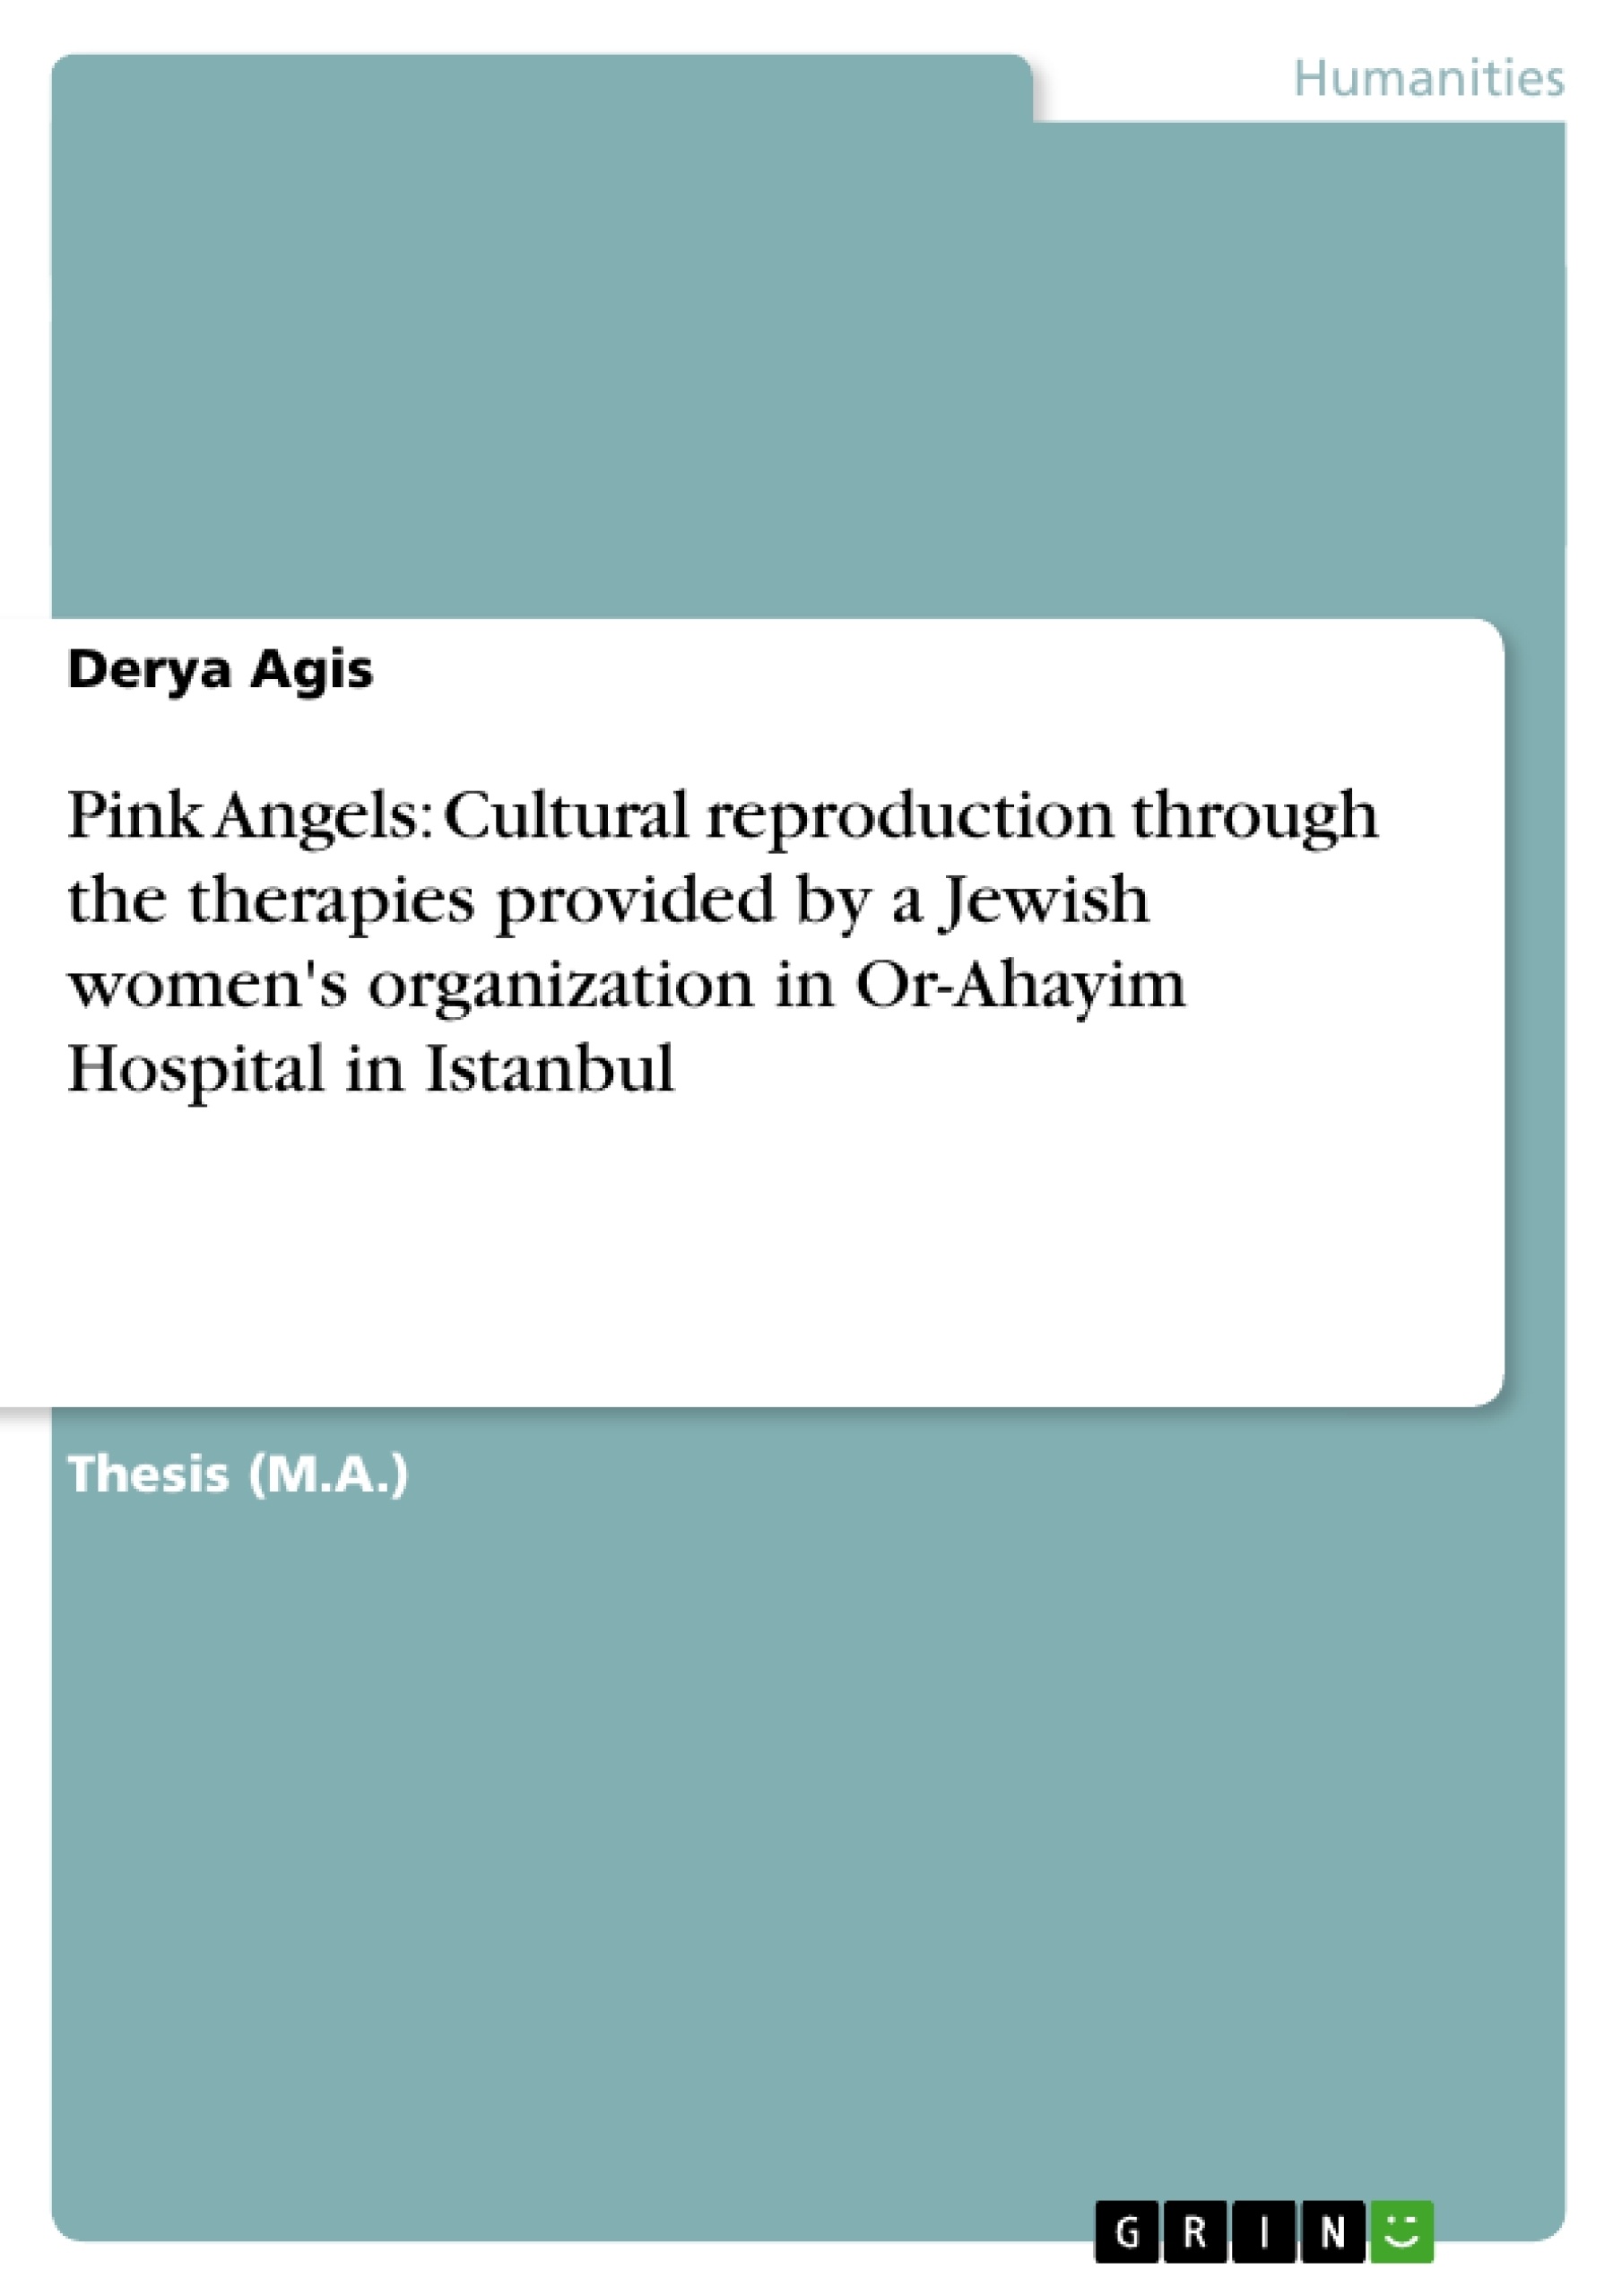 Titel: Pink Angels: Cultural reproduction through the therapies provided by a Jewish women's organization in Or-Ahayim Hospital in Istanbul